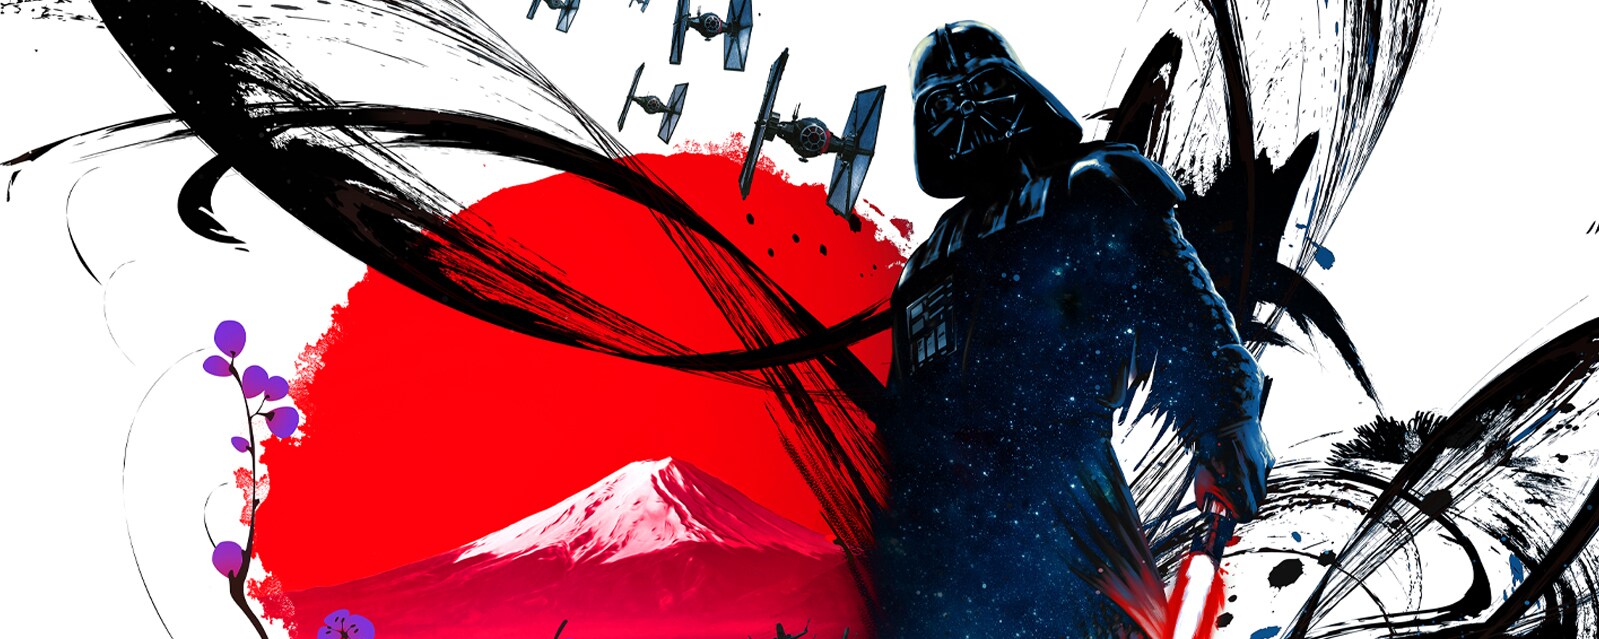 Star Wars Celebration Japan 2025 Key Art, created in the traditional Japanese black ink painting style known as sumi-e, with Darth Vader placed in the foreground. Brush strokes extend from the Sith Lord to the branches of a cherry blossom tree, leading to AT-ATs, X-wings, and TIE fighters. The Rising Sun of the Japanese flag balances the image, with Mount Fuji featured in its center.